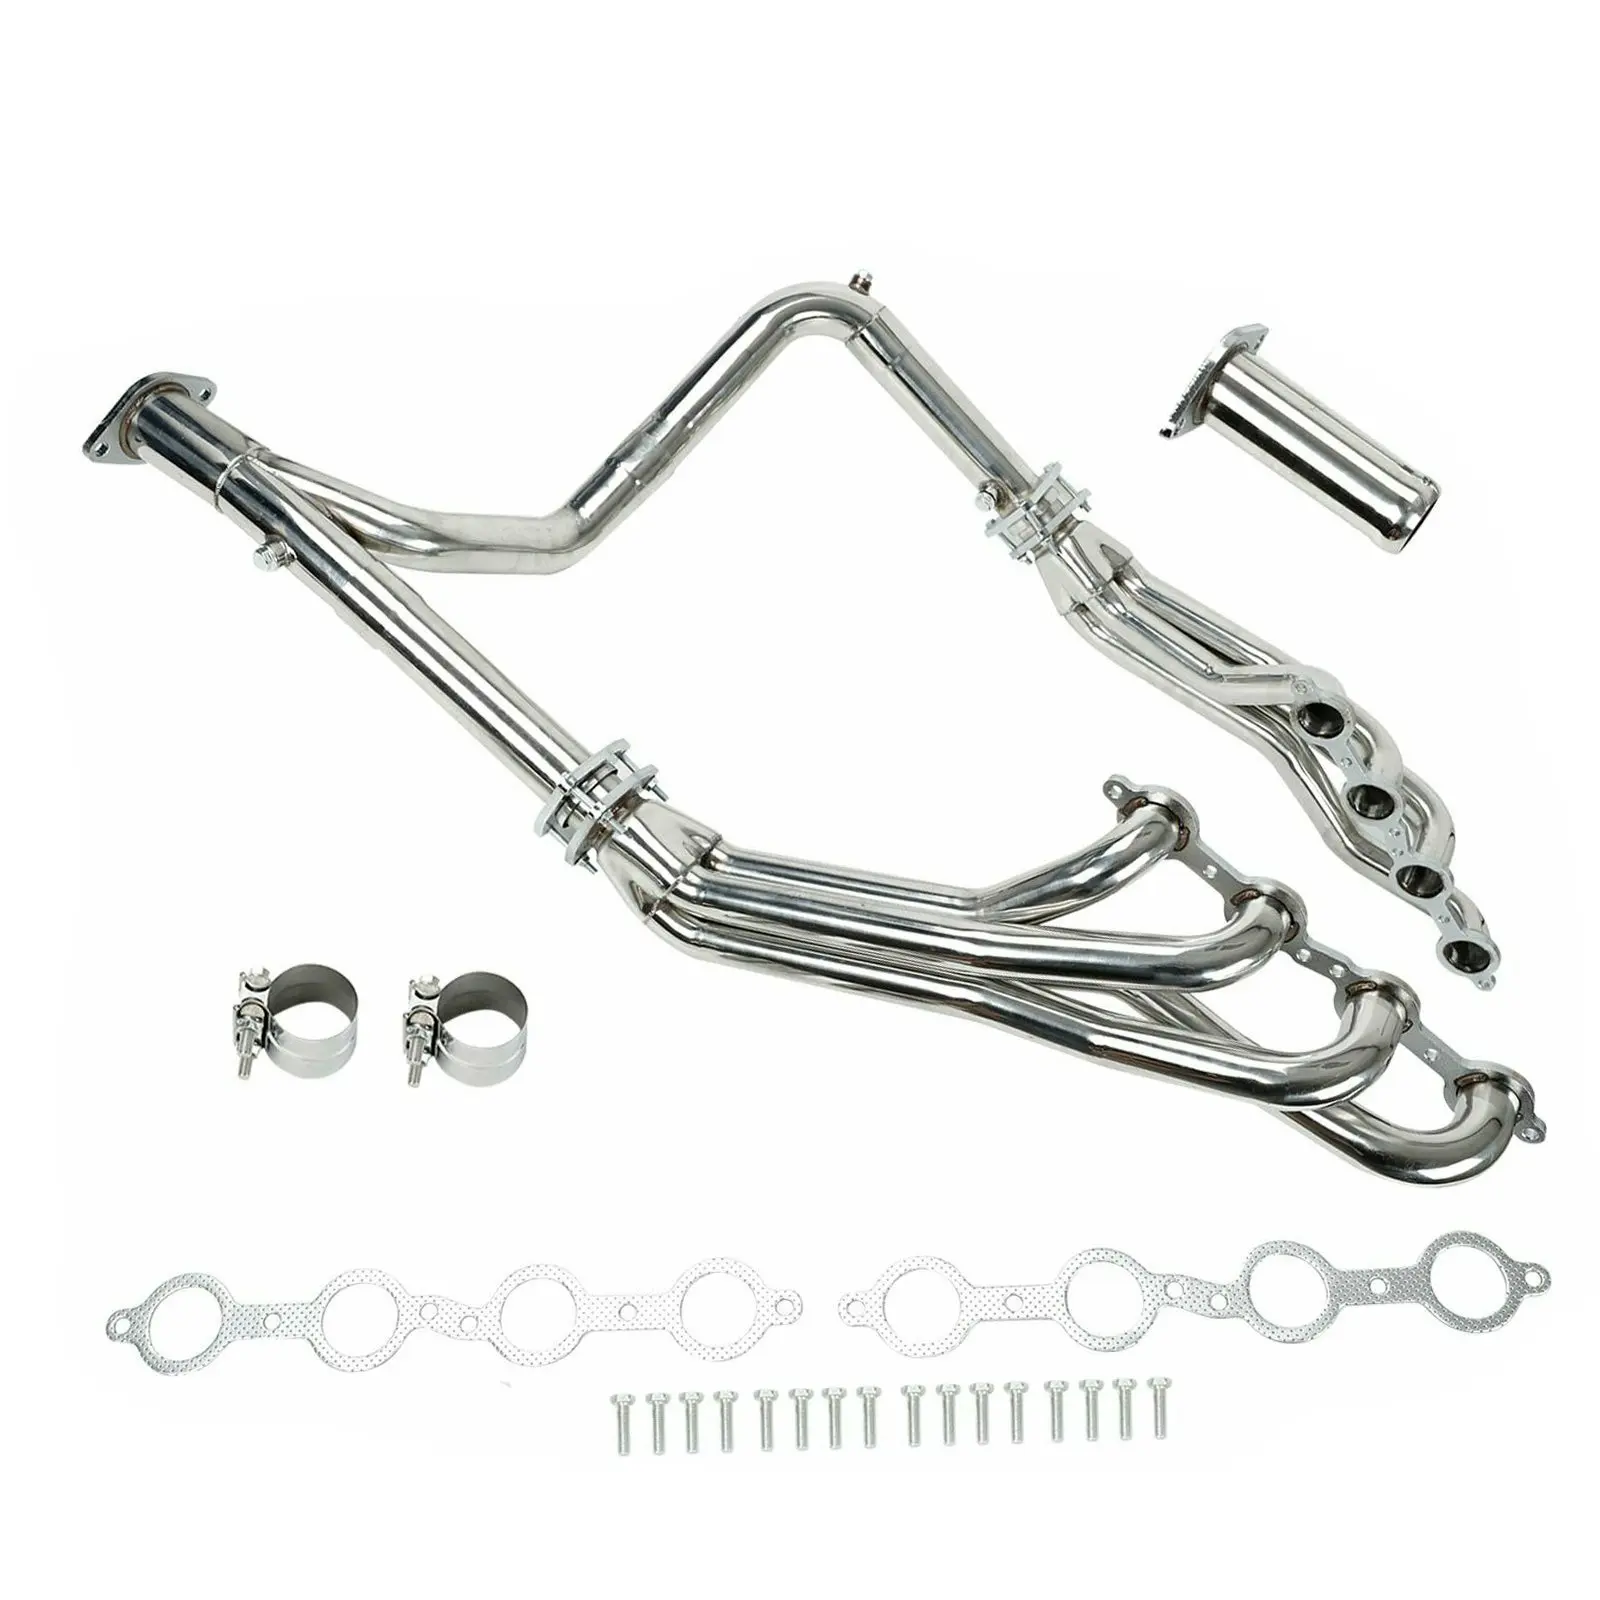 

USA In Stock For Chevy GMC 07-14 4.8L 5.3L 6.0L Long Tube Stainless Steel Headers w/ Y Pipe